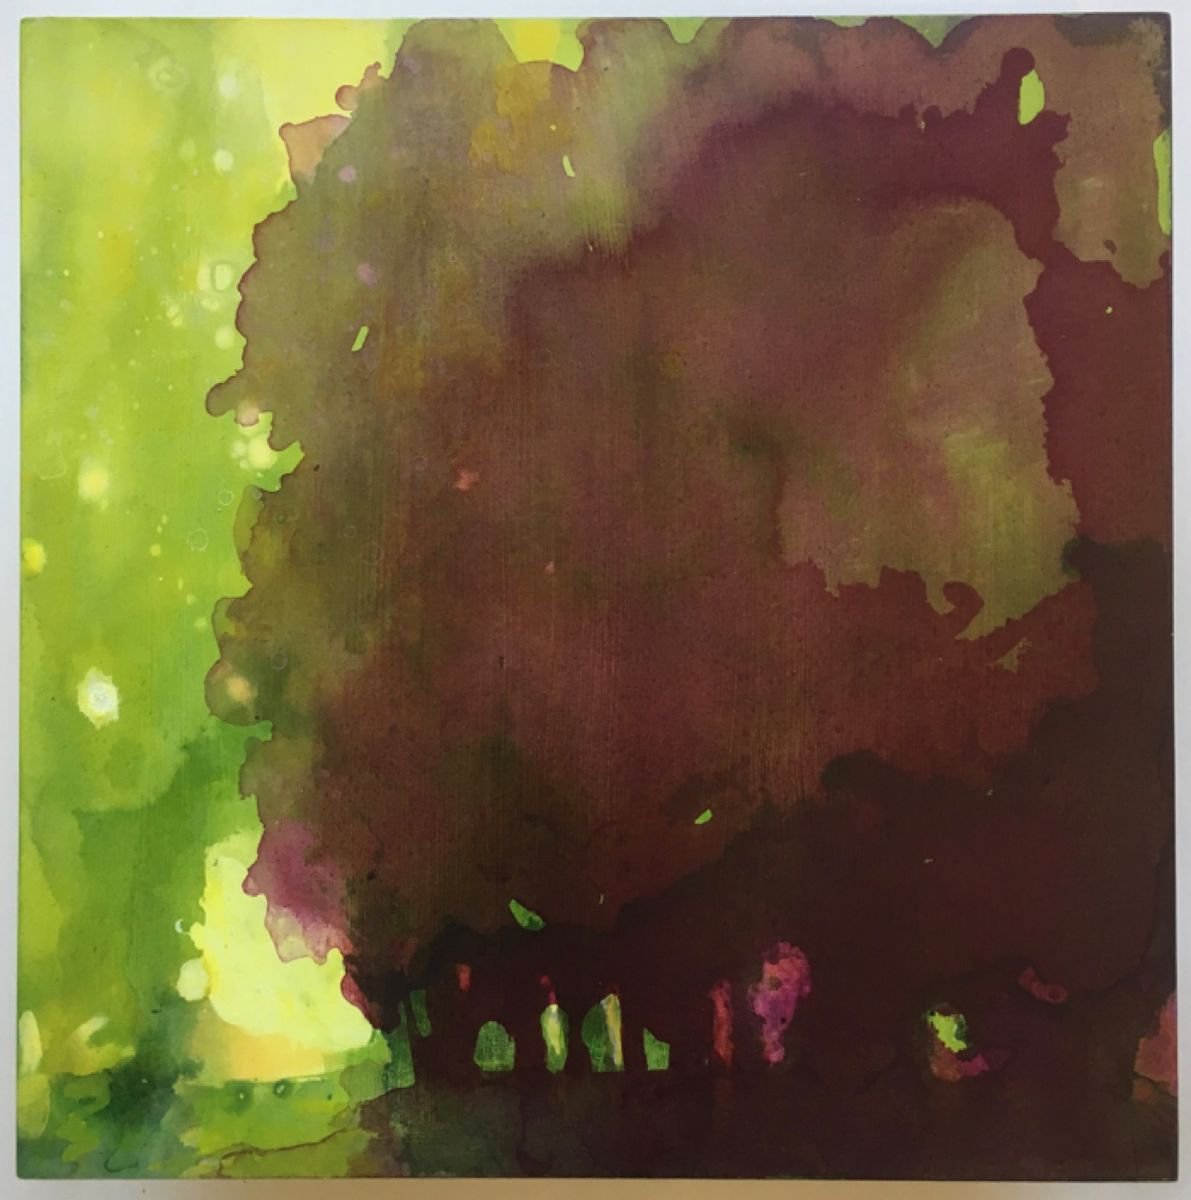 Sunbeams and Copper Beeches by Nichola Campbell